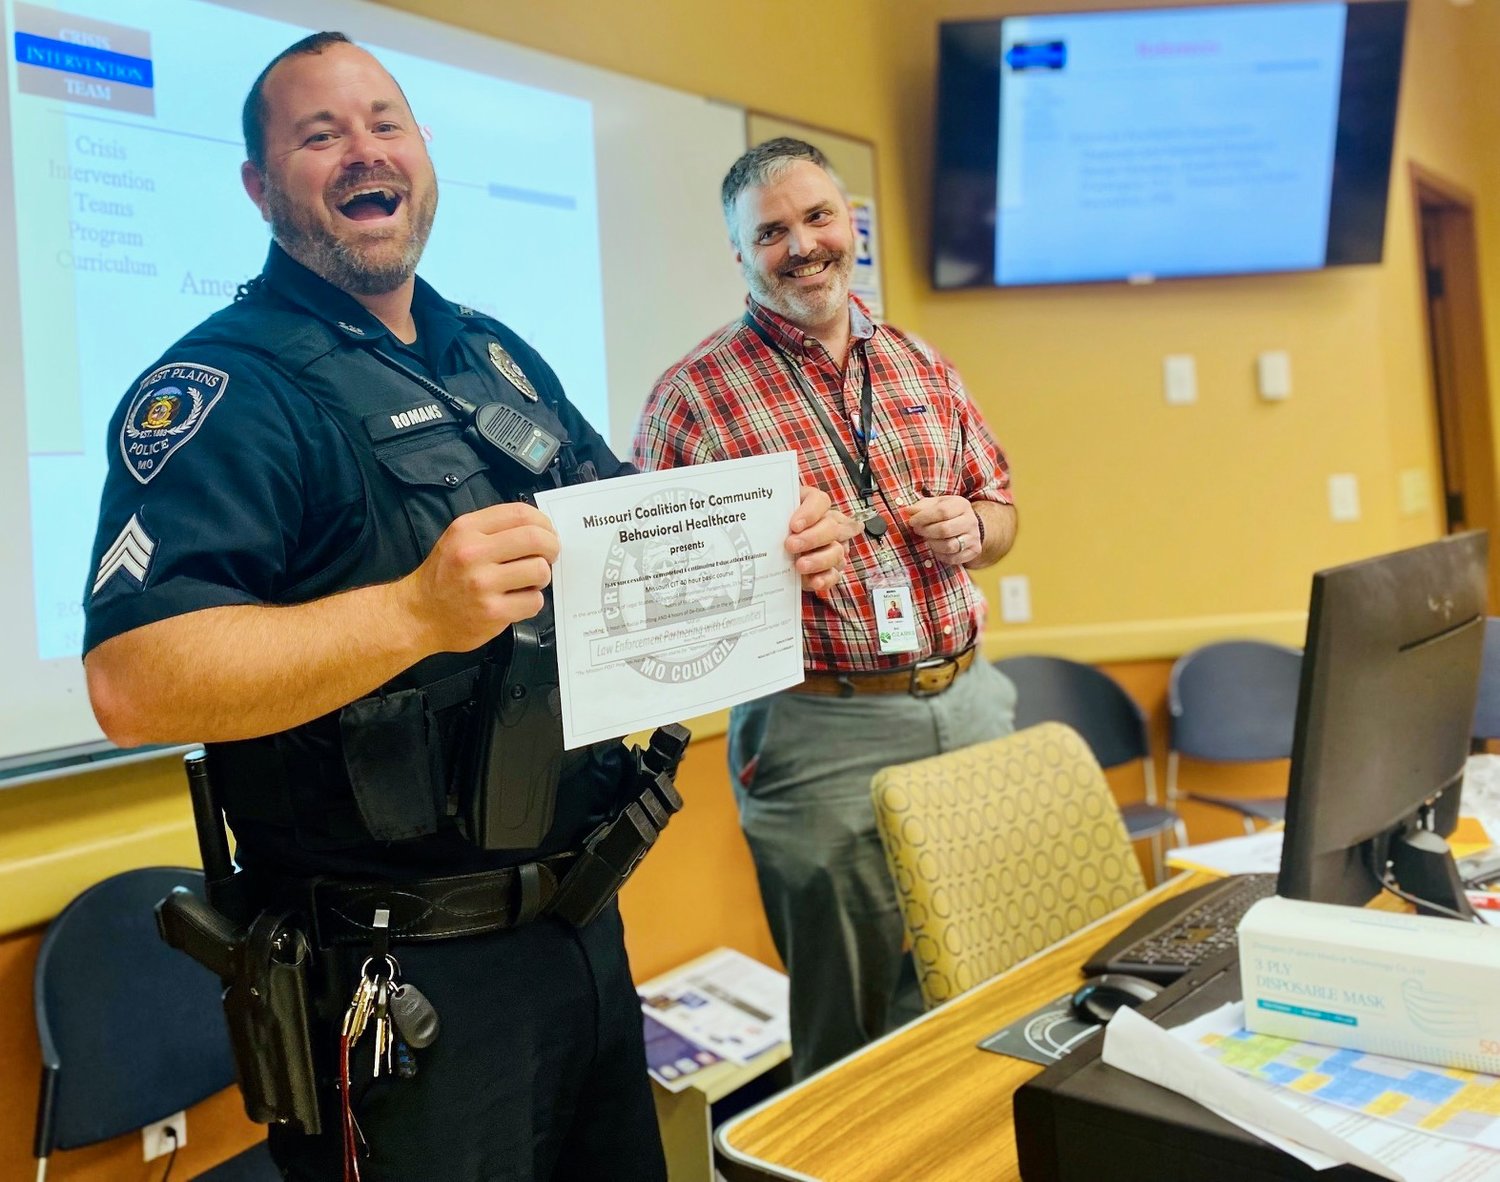 West Plains Police Patrol Sgt. Brandon Romans, left, is pictured accepting his certificate of completion of the Ozarks Healthcare BHC’s most recent CIT training as Community Behavioral Health Liaison Michael Lewis looks on.